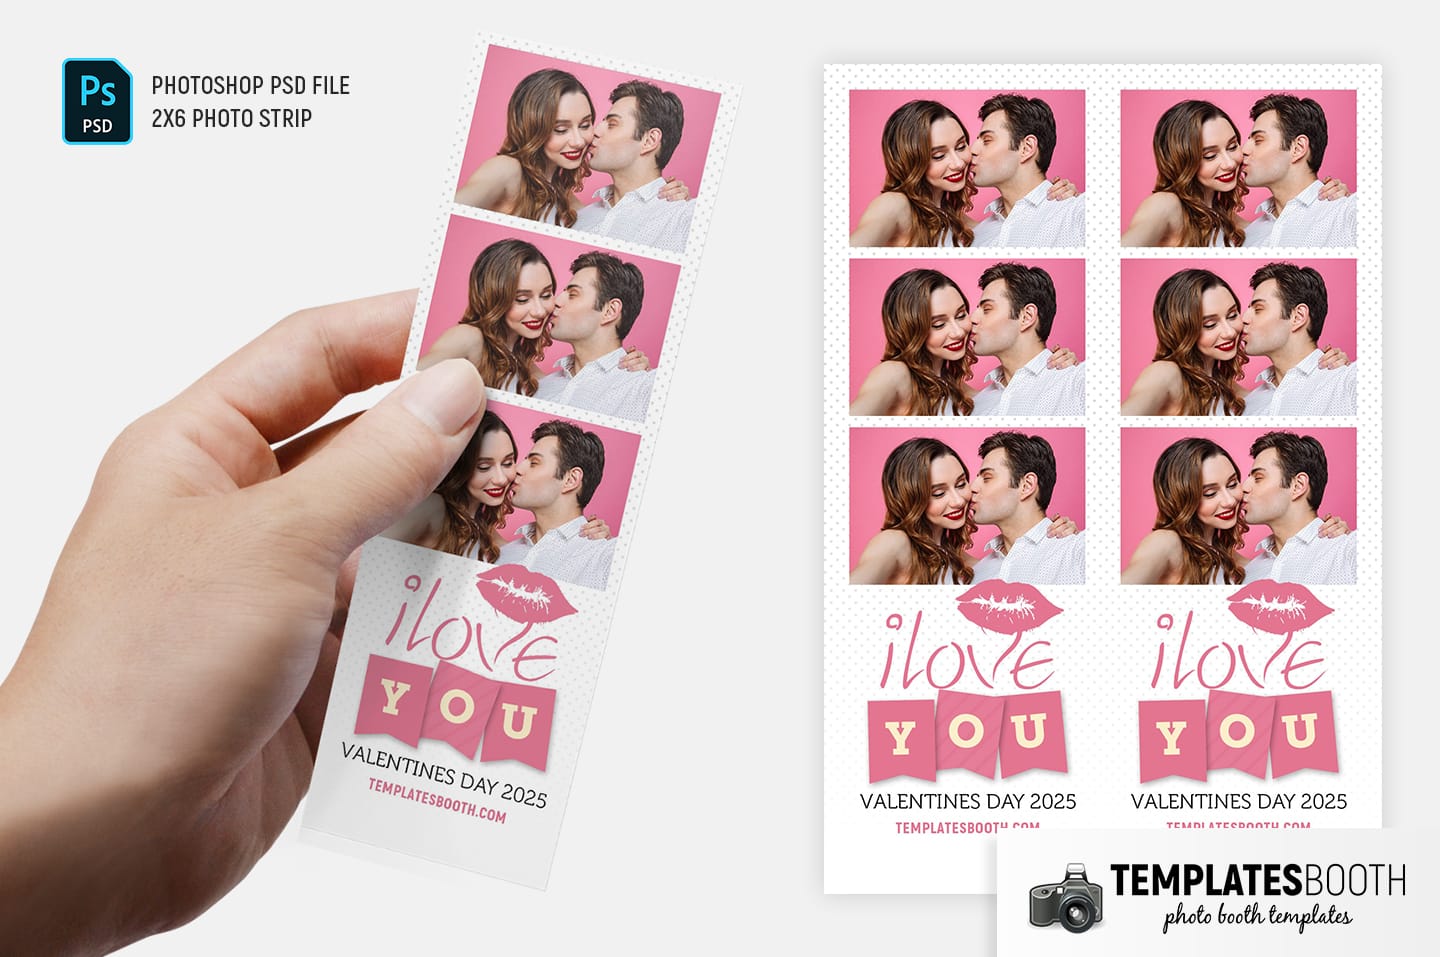 Valentines Kiss Photo Booth Template (2x6 photo strip)